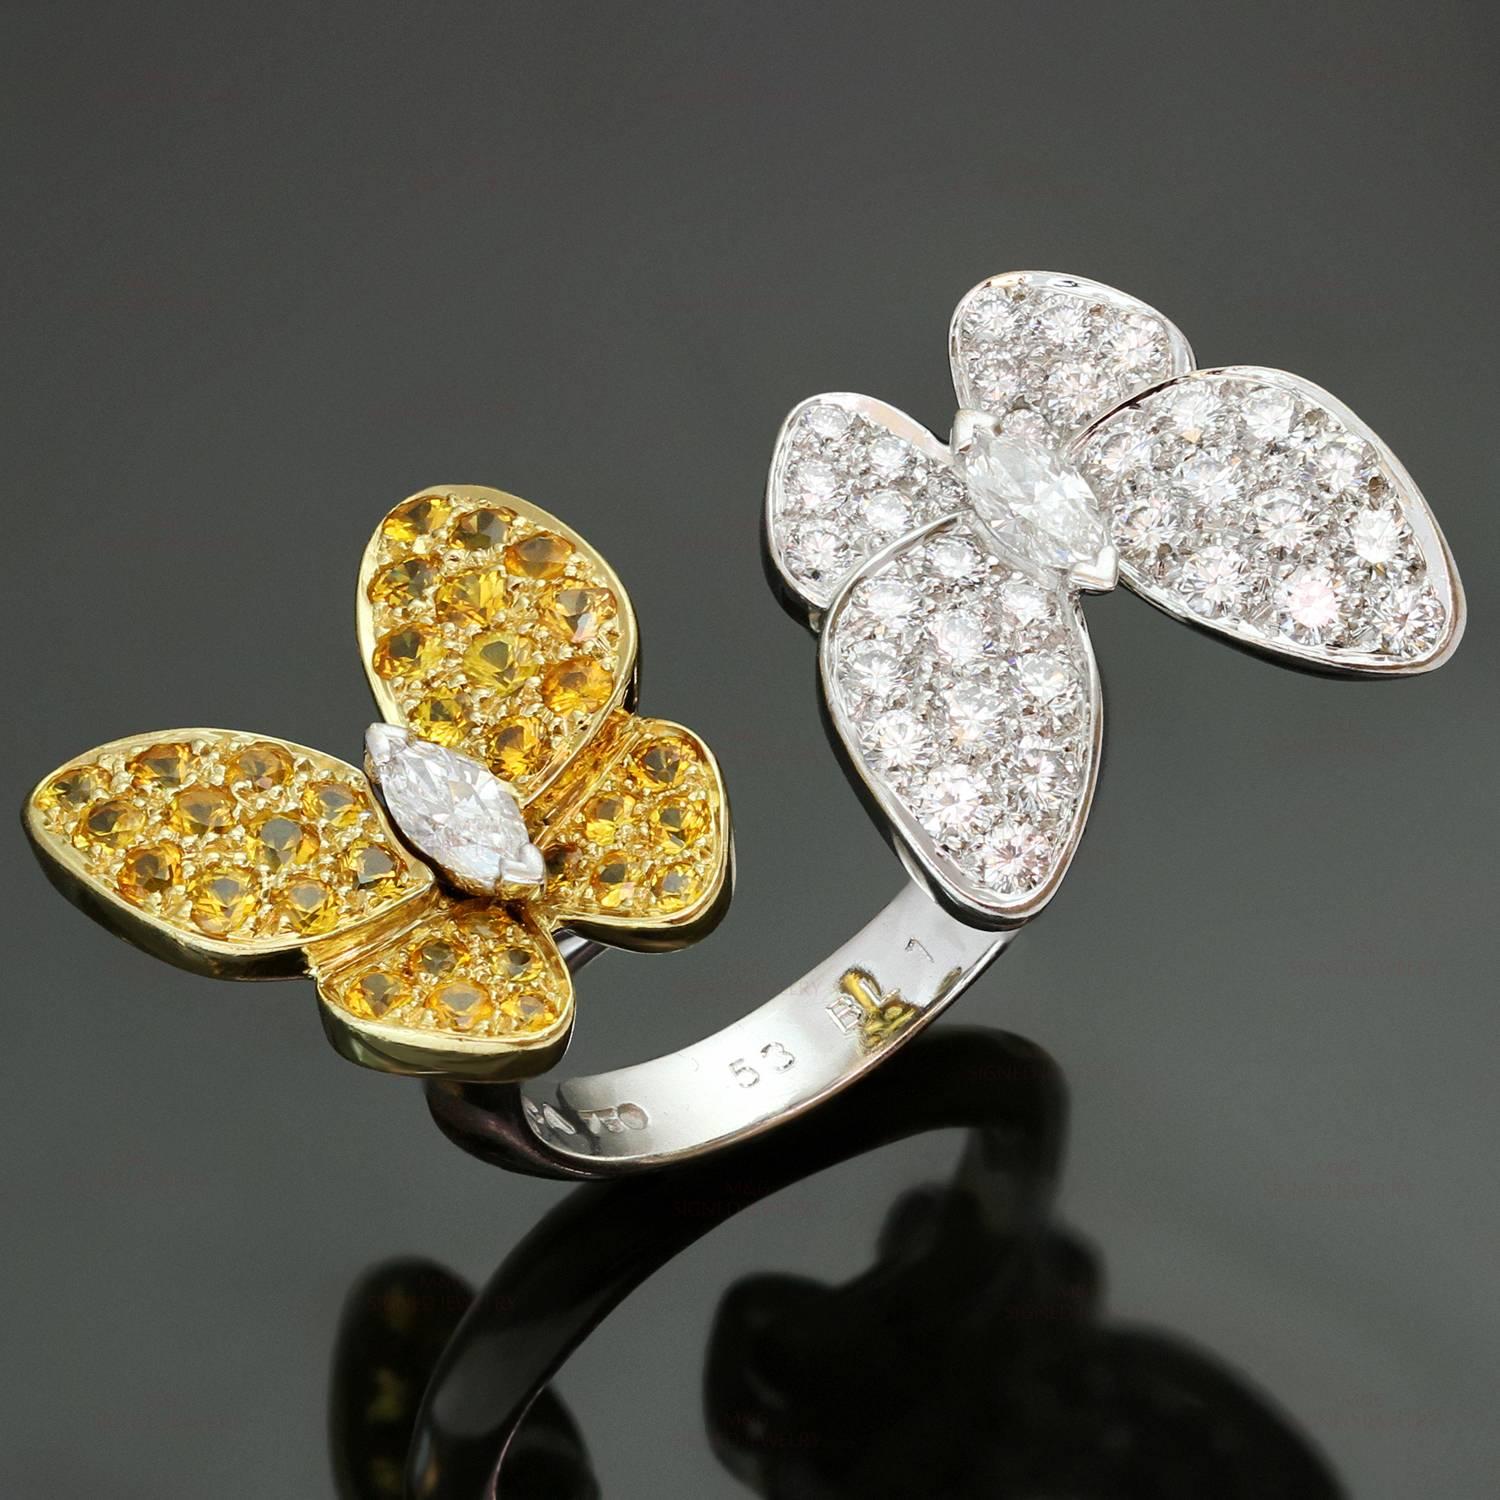 This dazzling Between the Finger ring from Van Cleef & Arpel's Two Butterfly collection is made in 18k white and yellow gold and features a pair of sparkling delicate butterflies fitting perfectly between two fingers in a striking contrast of